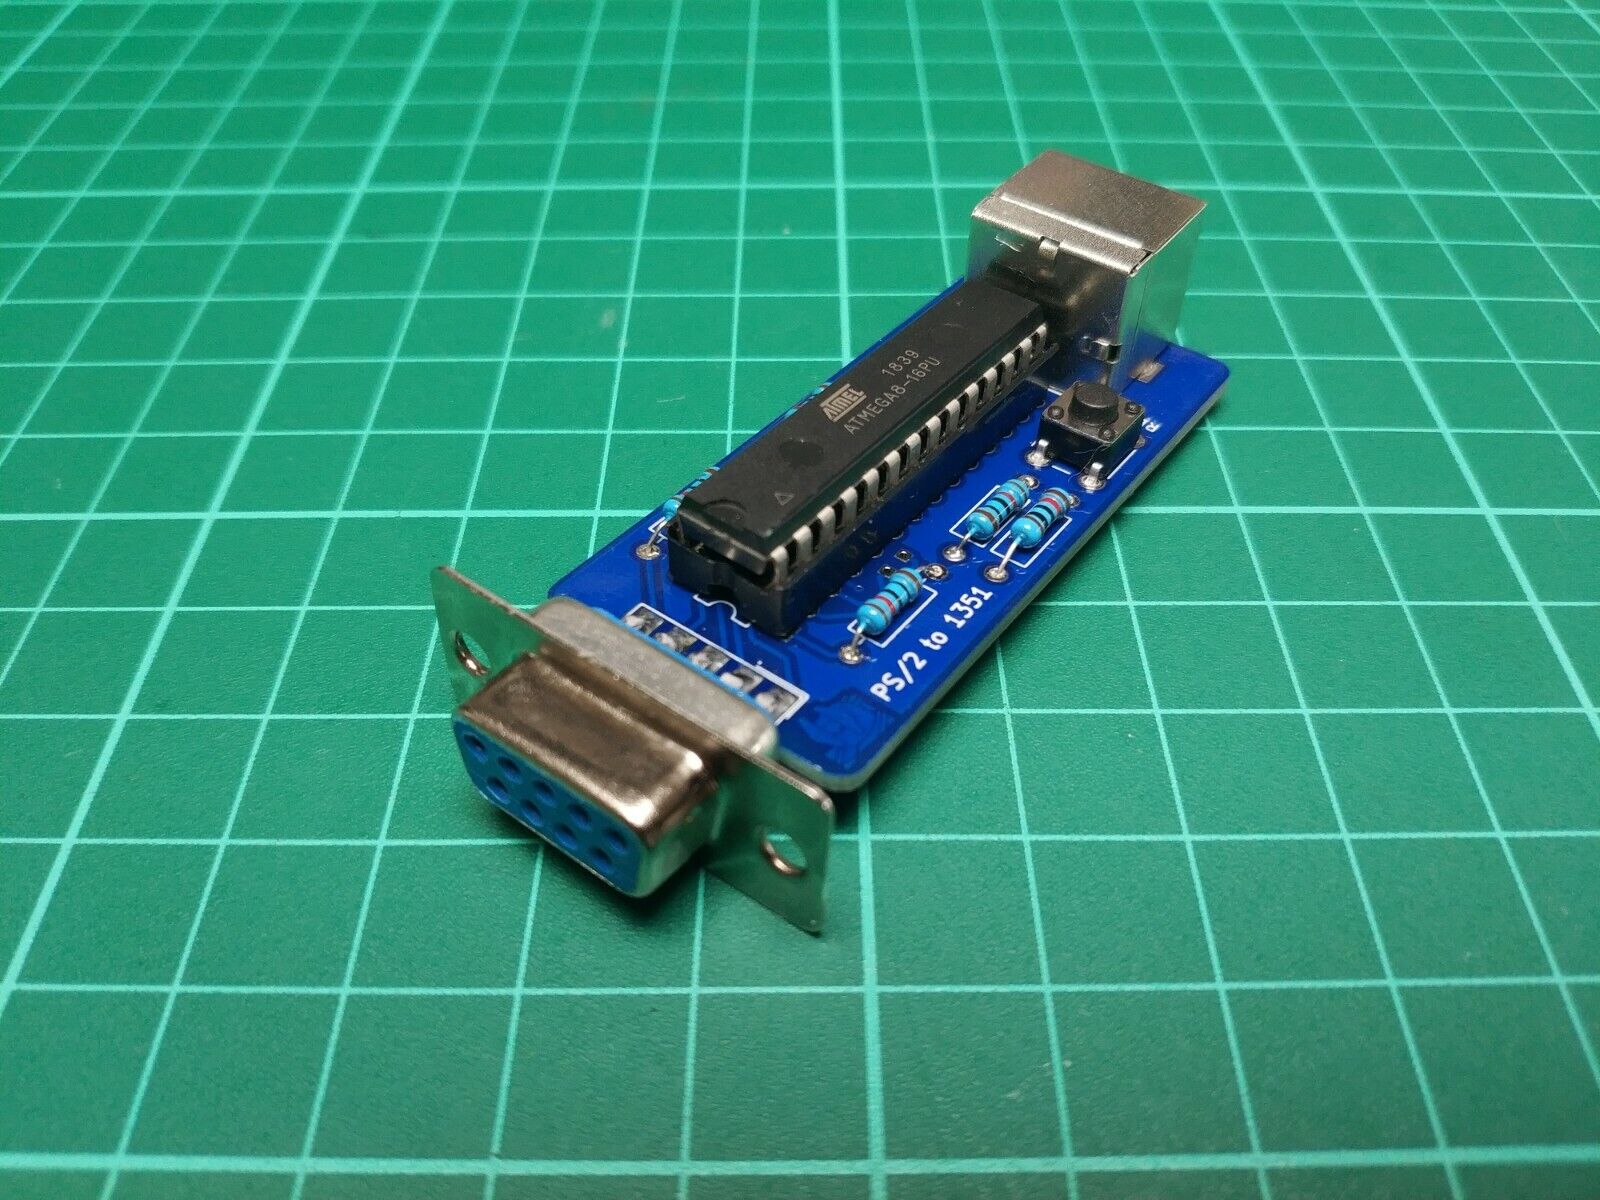 PS2 to 1351 mouse adapter for Commodore 64 / C64 / 128 / C128 